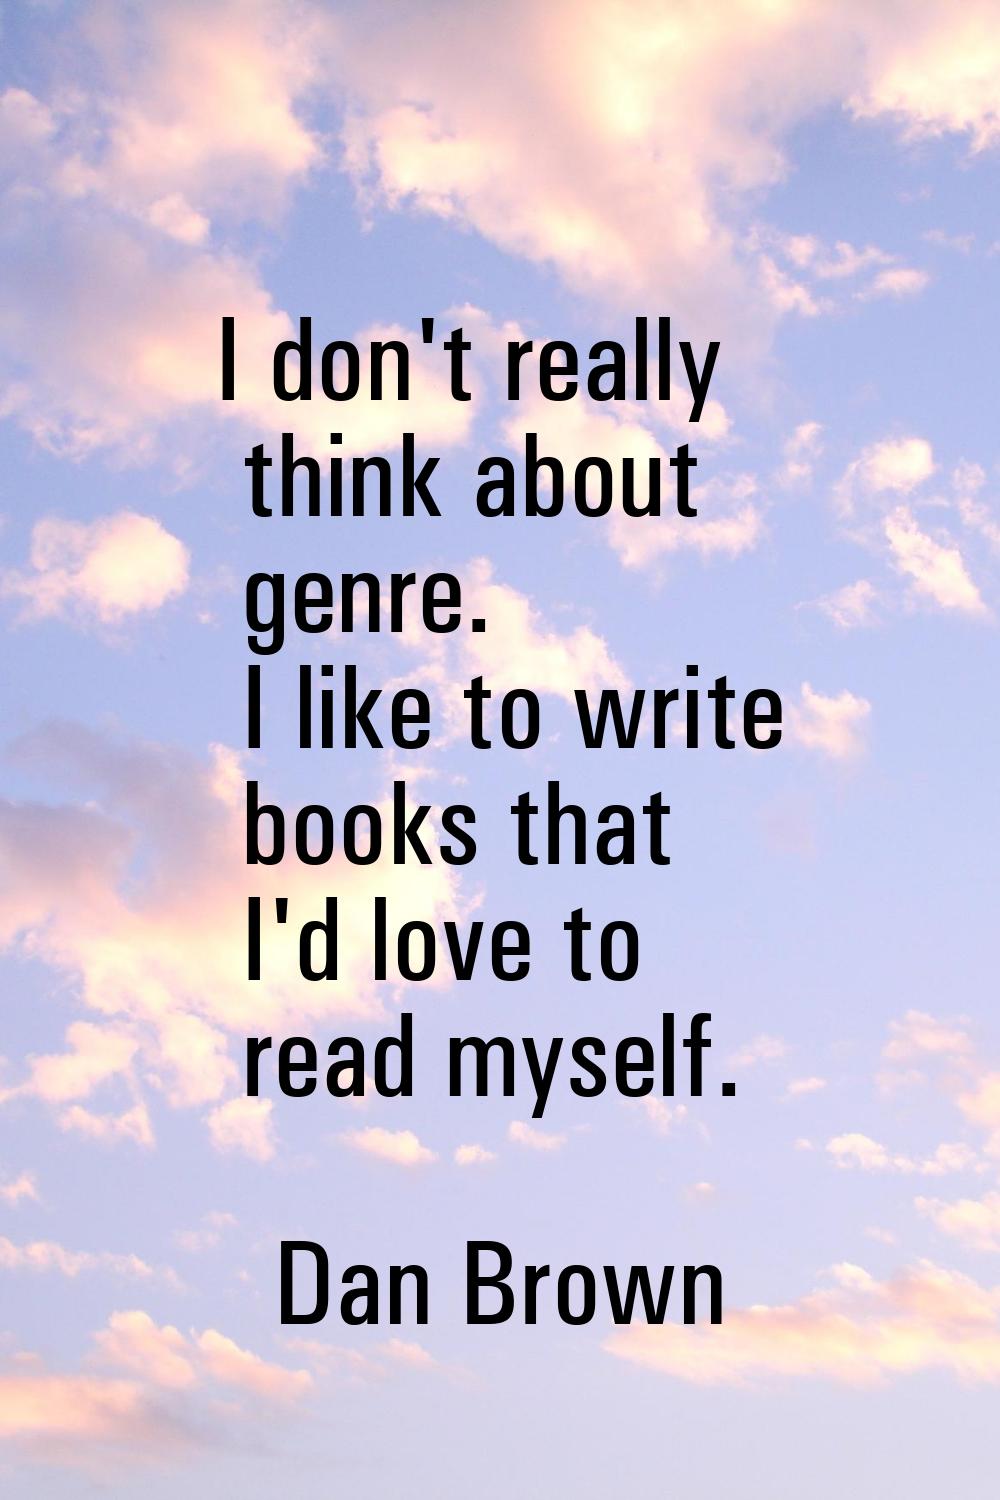 I don't really think about genre. I like to write books that I'd love to read myself.